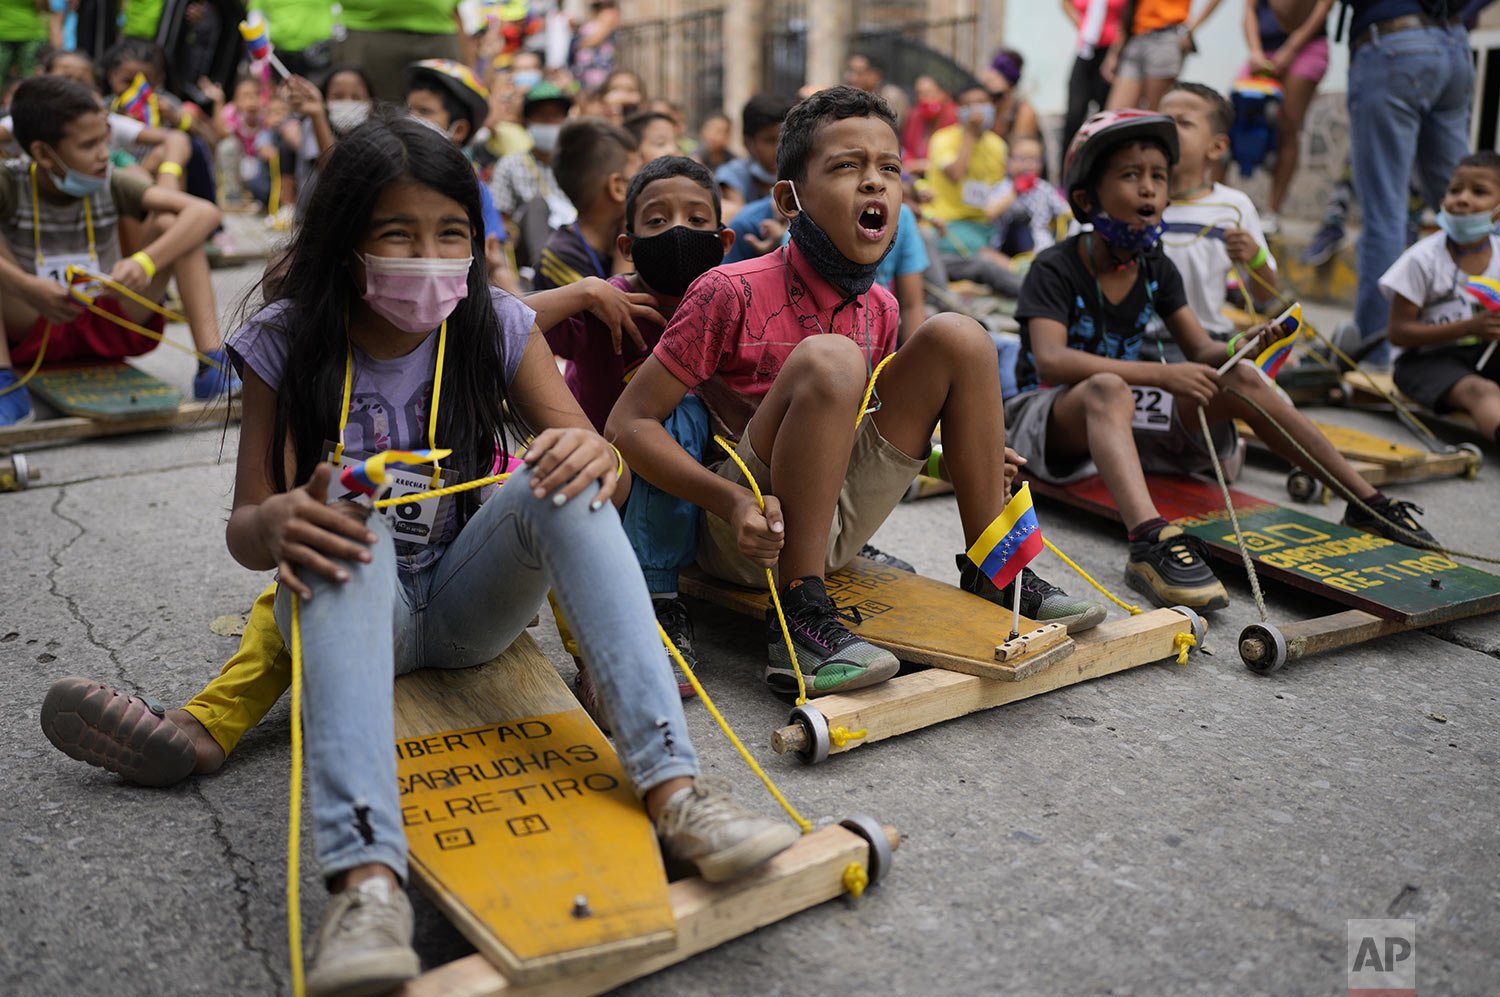  Children compete in a traditional street race of "carruchas," the name for makeshift wooden cars in Caracas, Venezuela, Dec. 18, 2021. (AP Photo/Ariana Cubillos) 